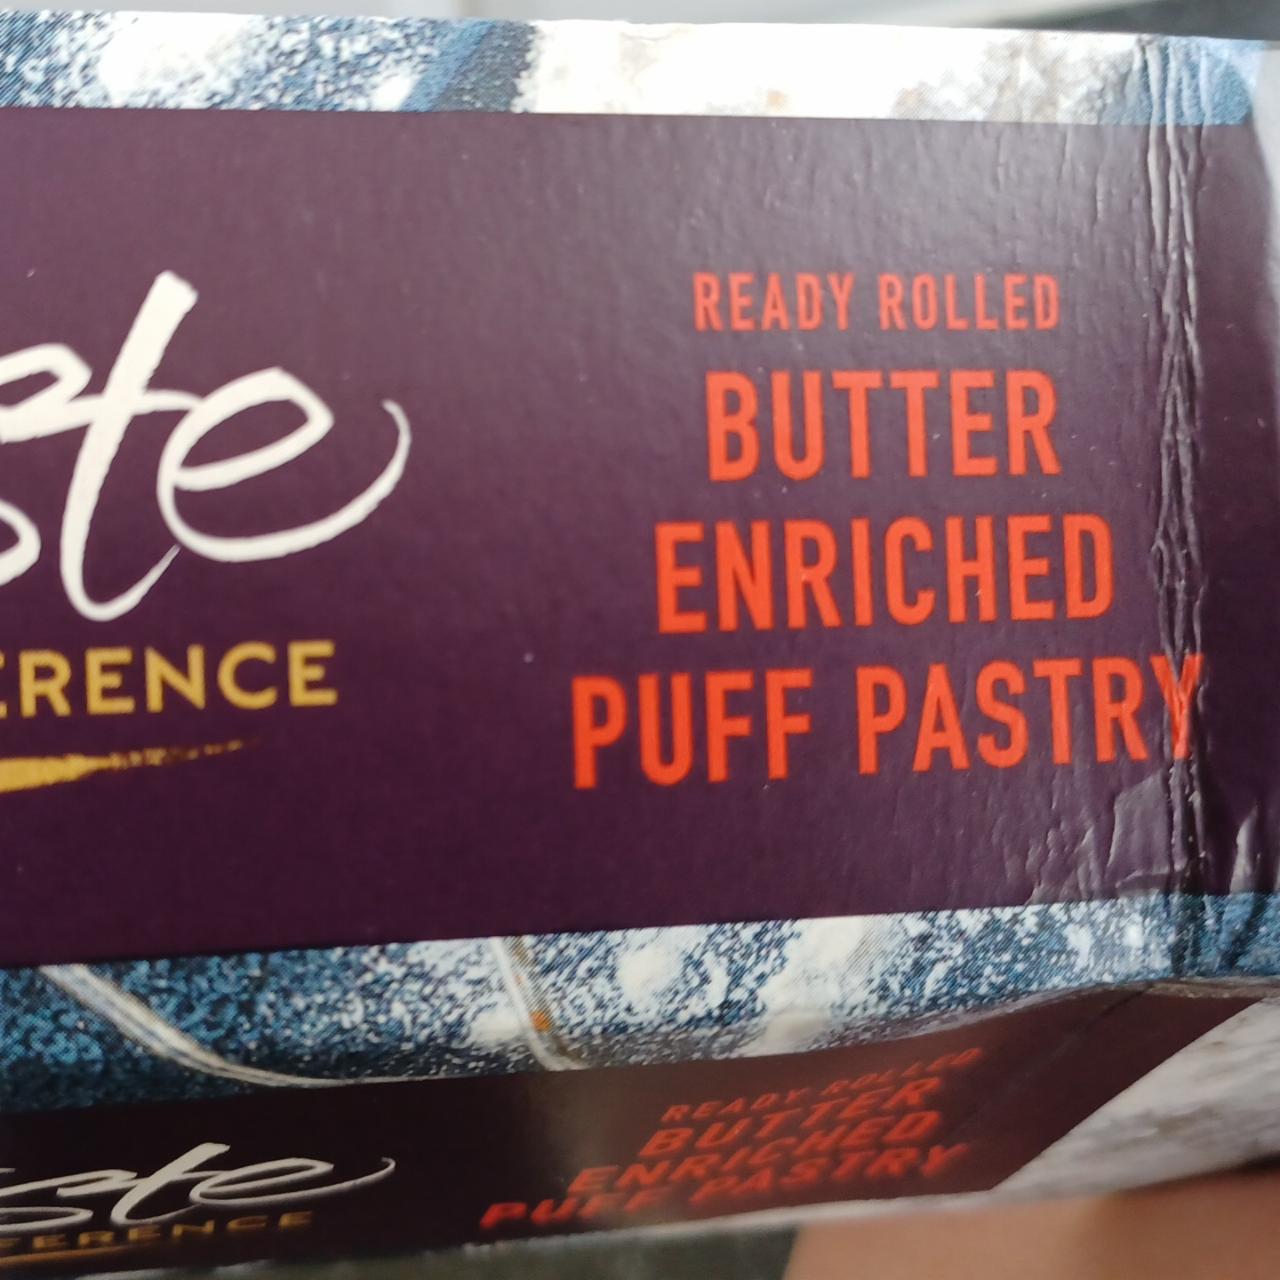 Fotografie - Ready rolled Butter Enriched Puff Pastry by Taste the difference